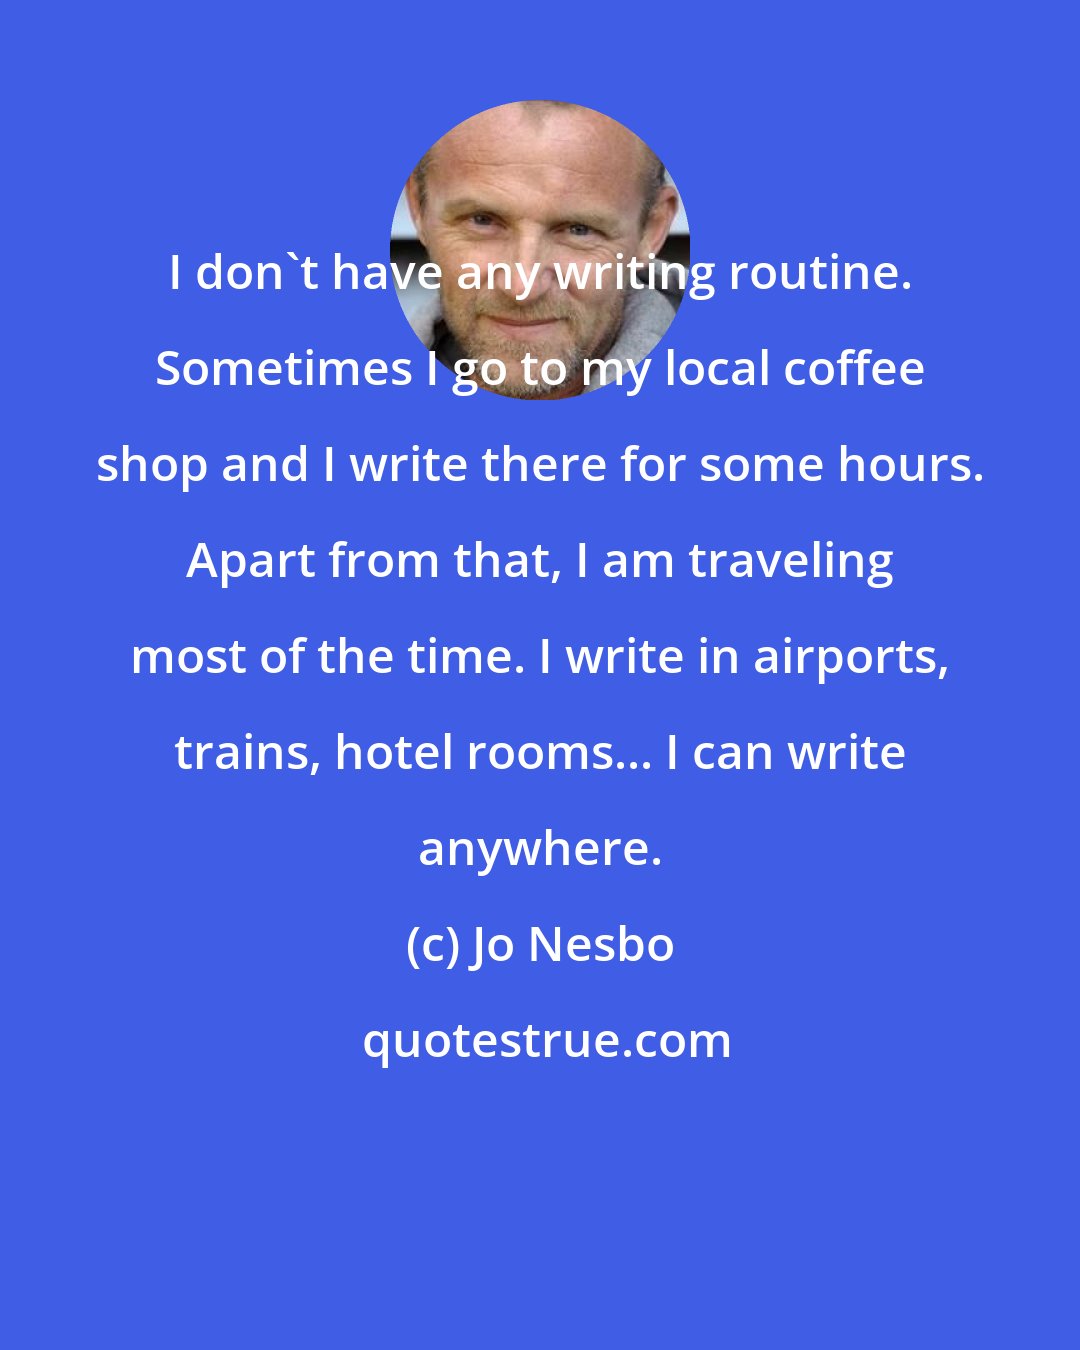 Jo Nesbo: I don't have any writing routine. Sometimes I go to my local coffee shop and I write there for some hours. Apart from that, I am traveling most of the time. I write in airports, trains, hotel rooms... I can write anywhere.